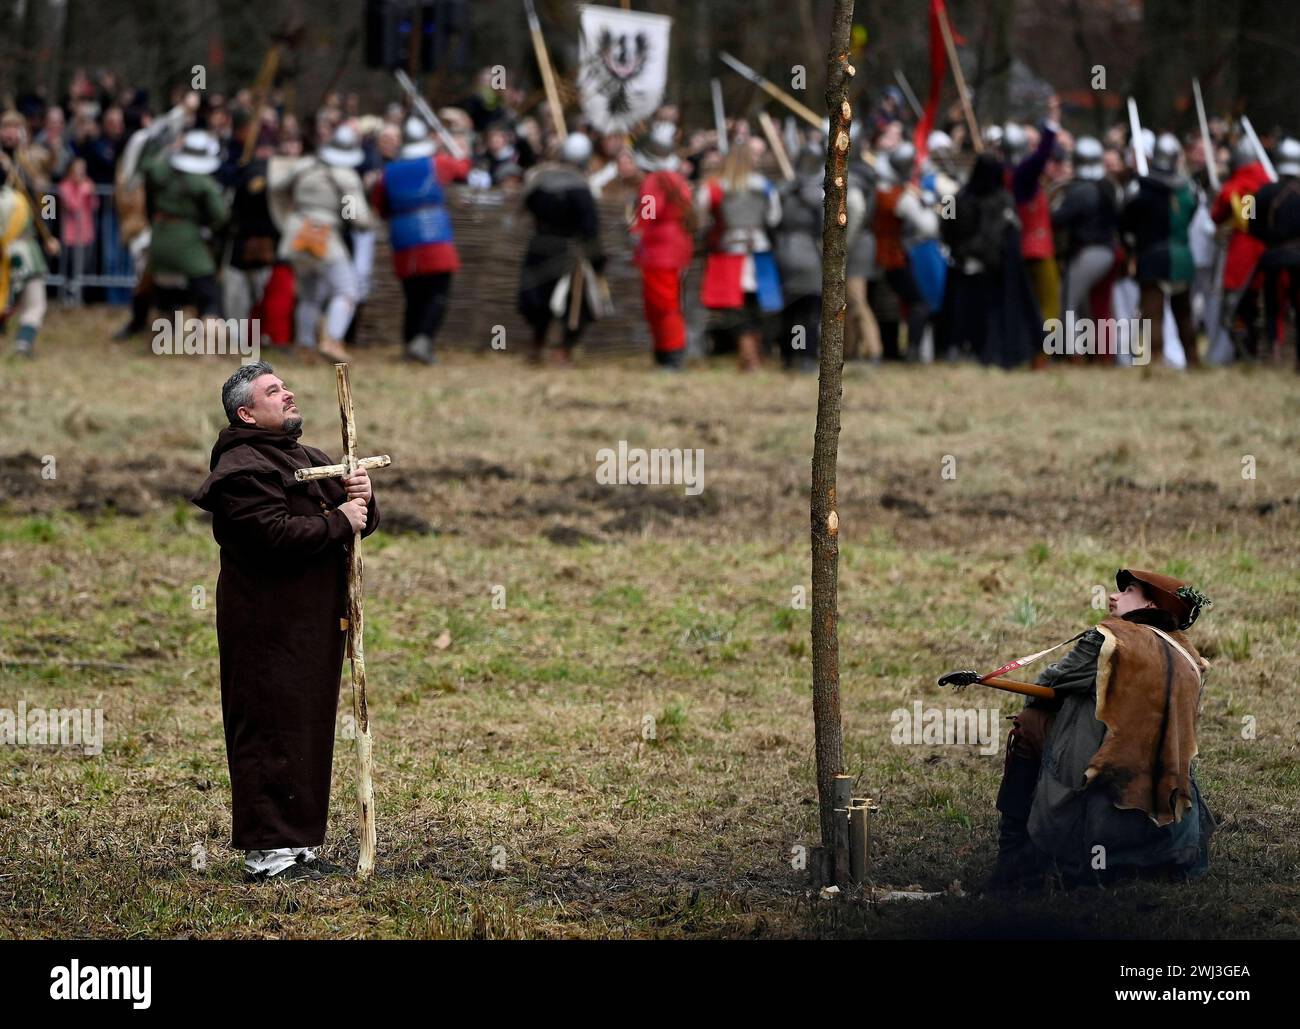 Donja Stubica, Croatia, 100224. Reconstruction of the historical battle between the serfs led by Matija Gubec and the army of the Hungarian-Croatian nobleman Ferenc Franjo Tahi from 1573, which marks the 451st anniversary of the Peasants Revolt in Donja Stubica. Photo: Ronald Gorsic / CROPIX Copyright: xxRonaldxGorsicx/xCROPIXx seljacka buna6-100224 Stock Photo